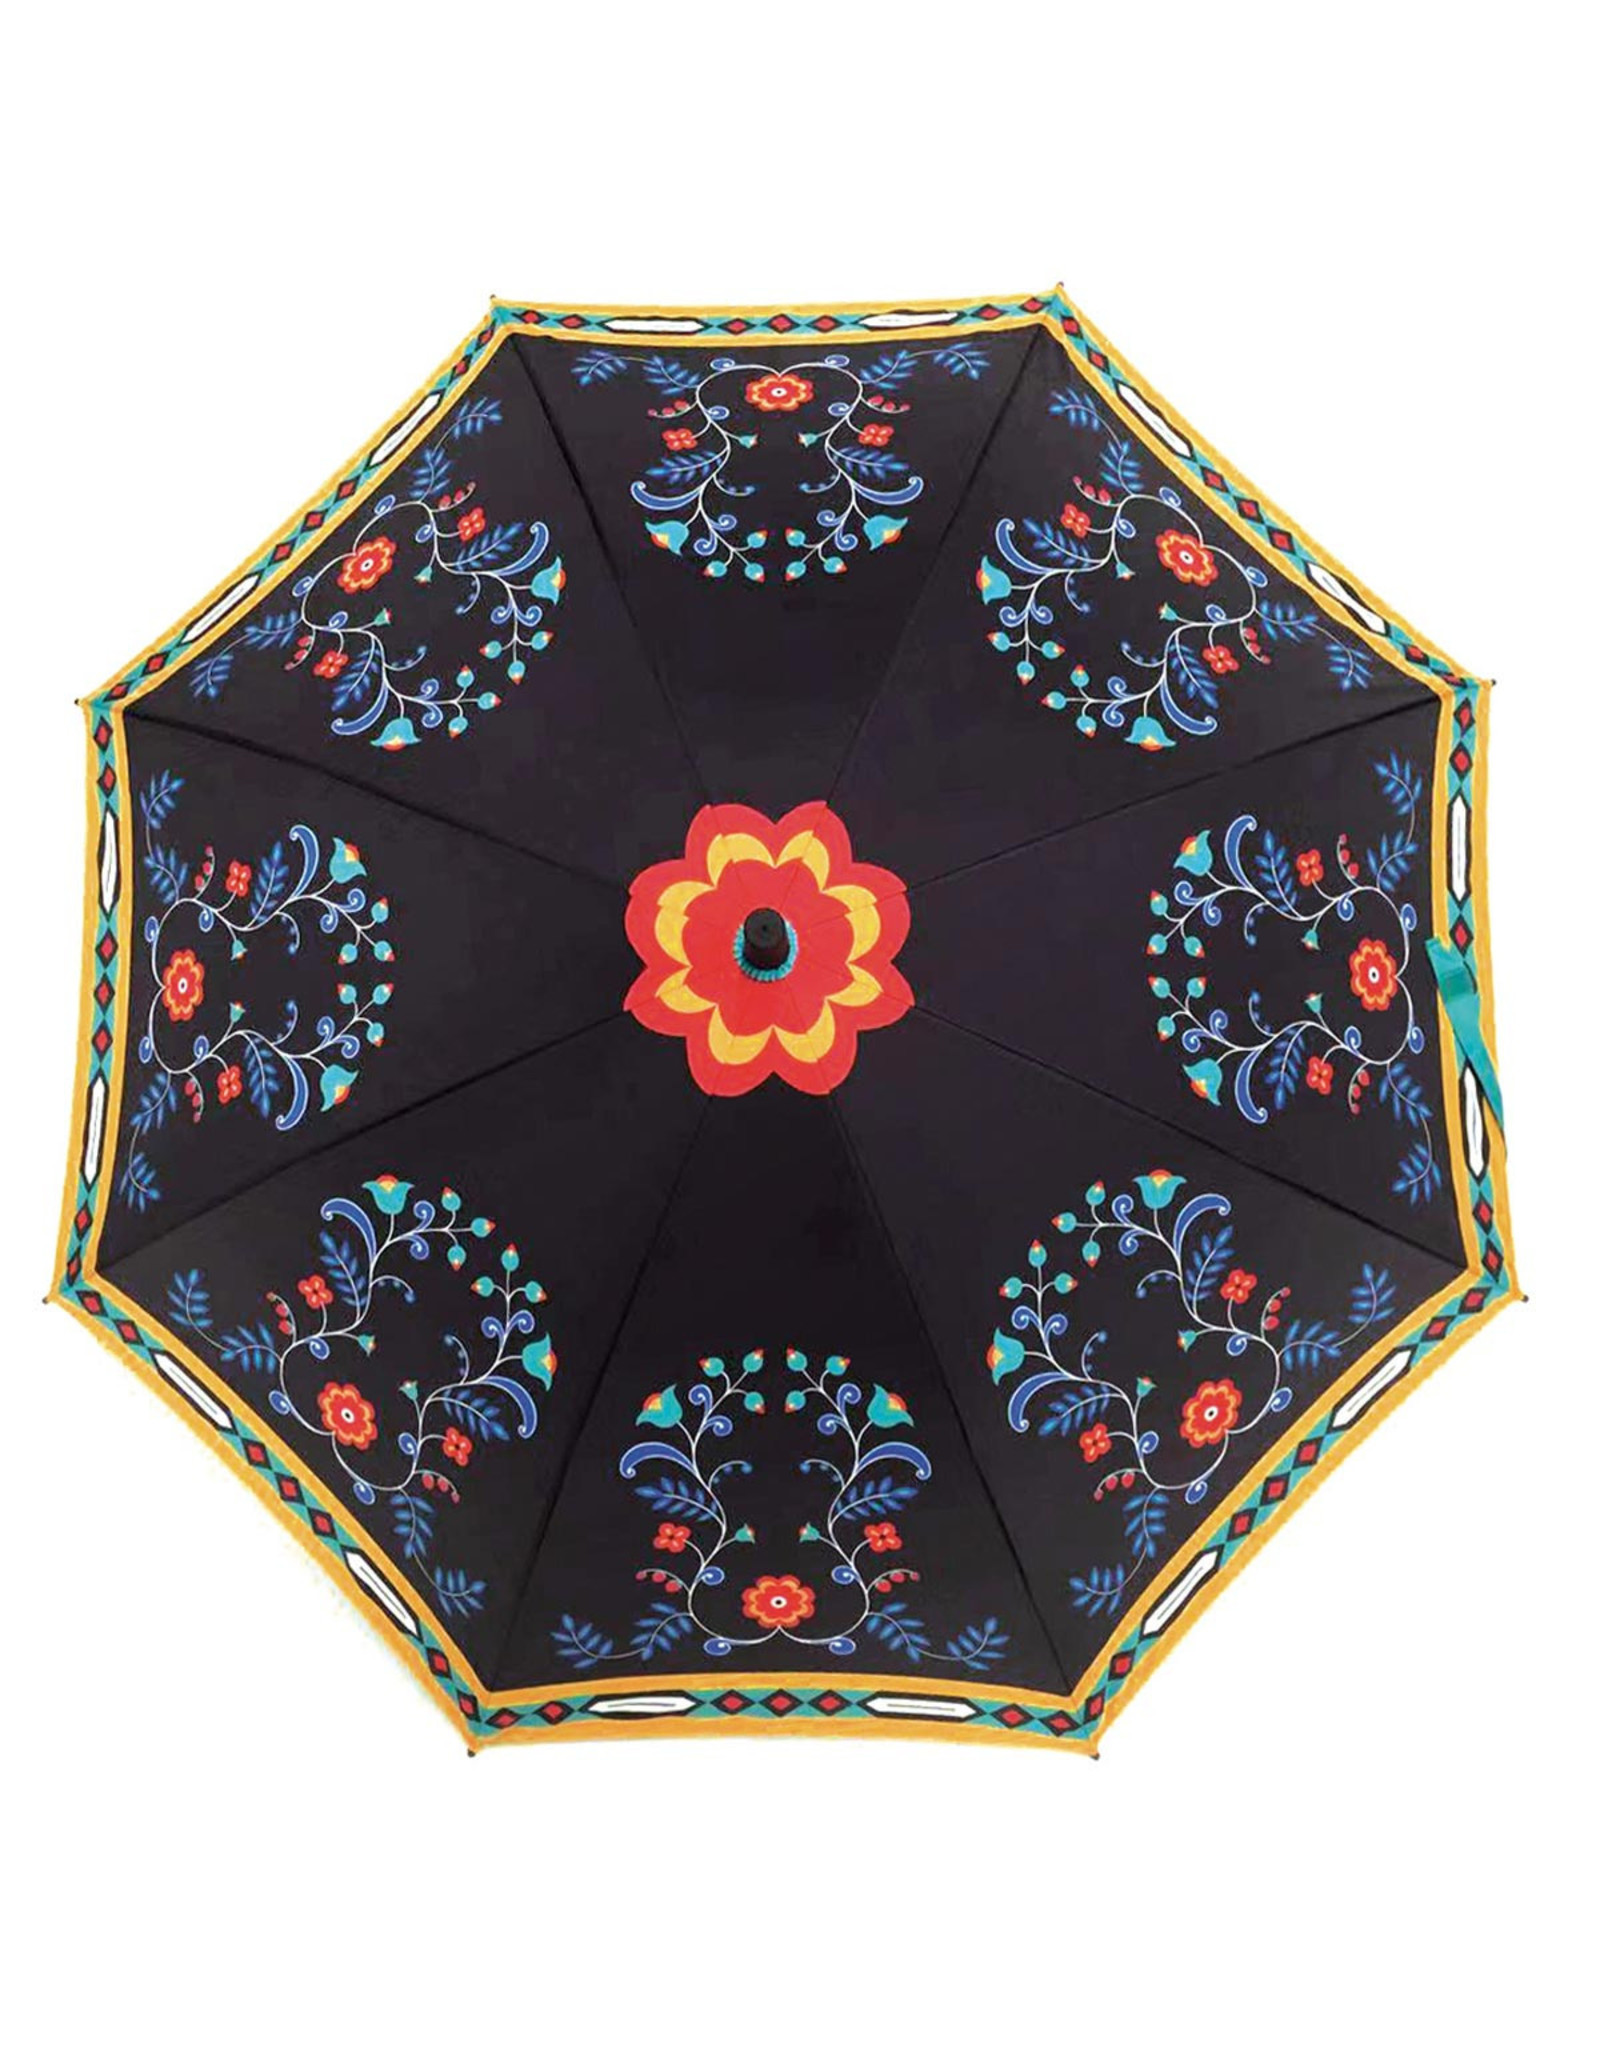 Umbrella Honouring Our Life Givers by Sharifah Marsden - UM42